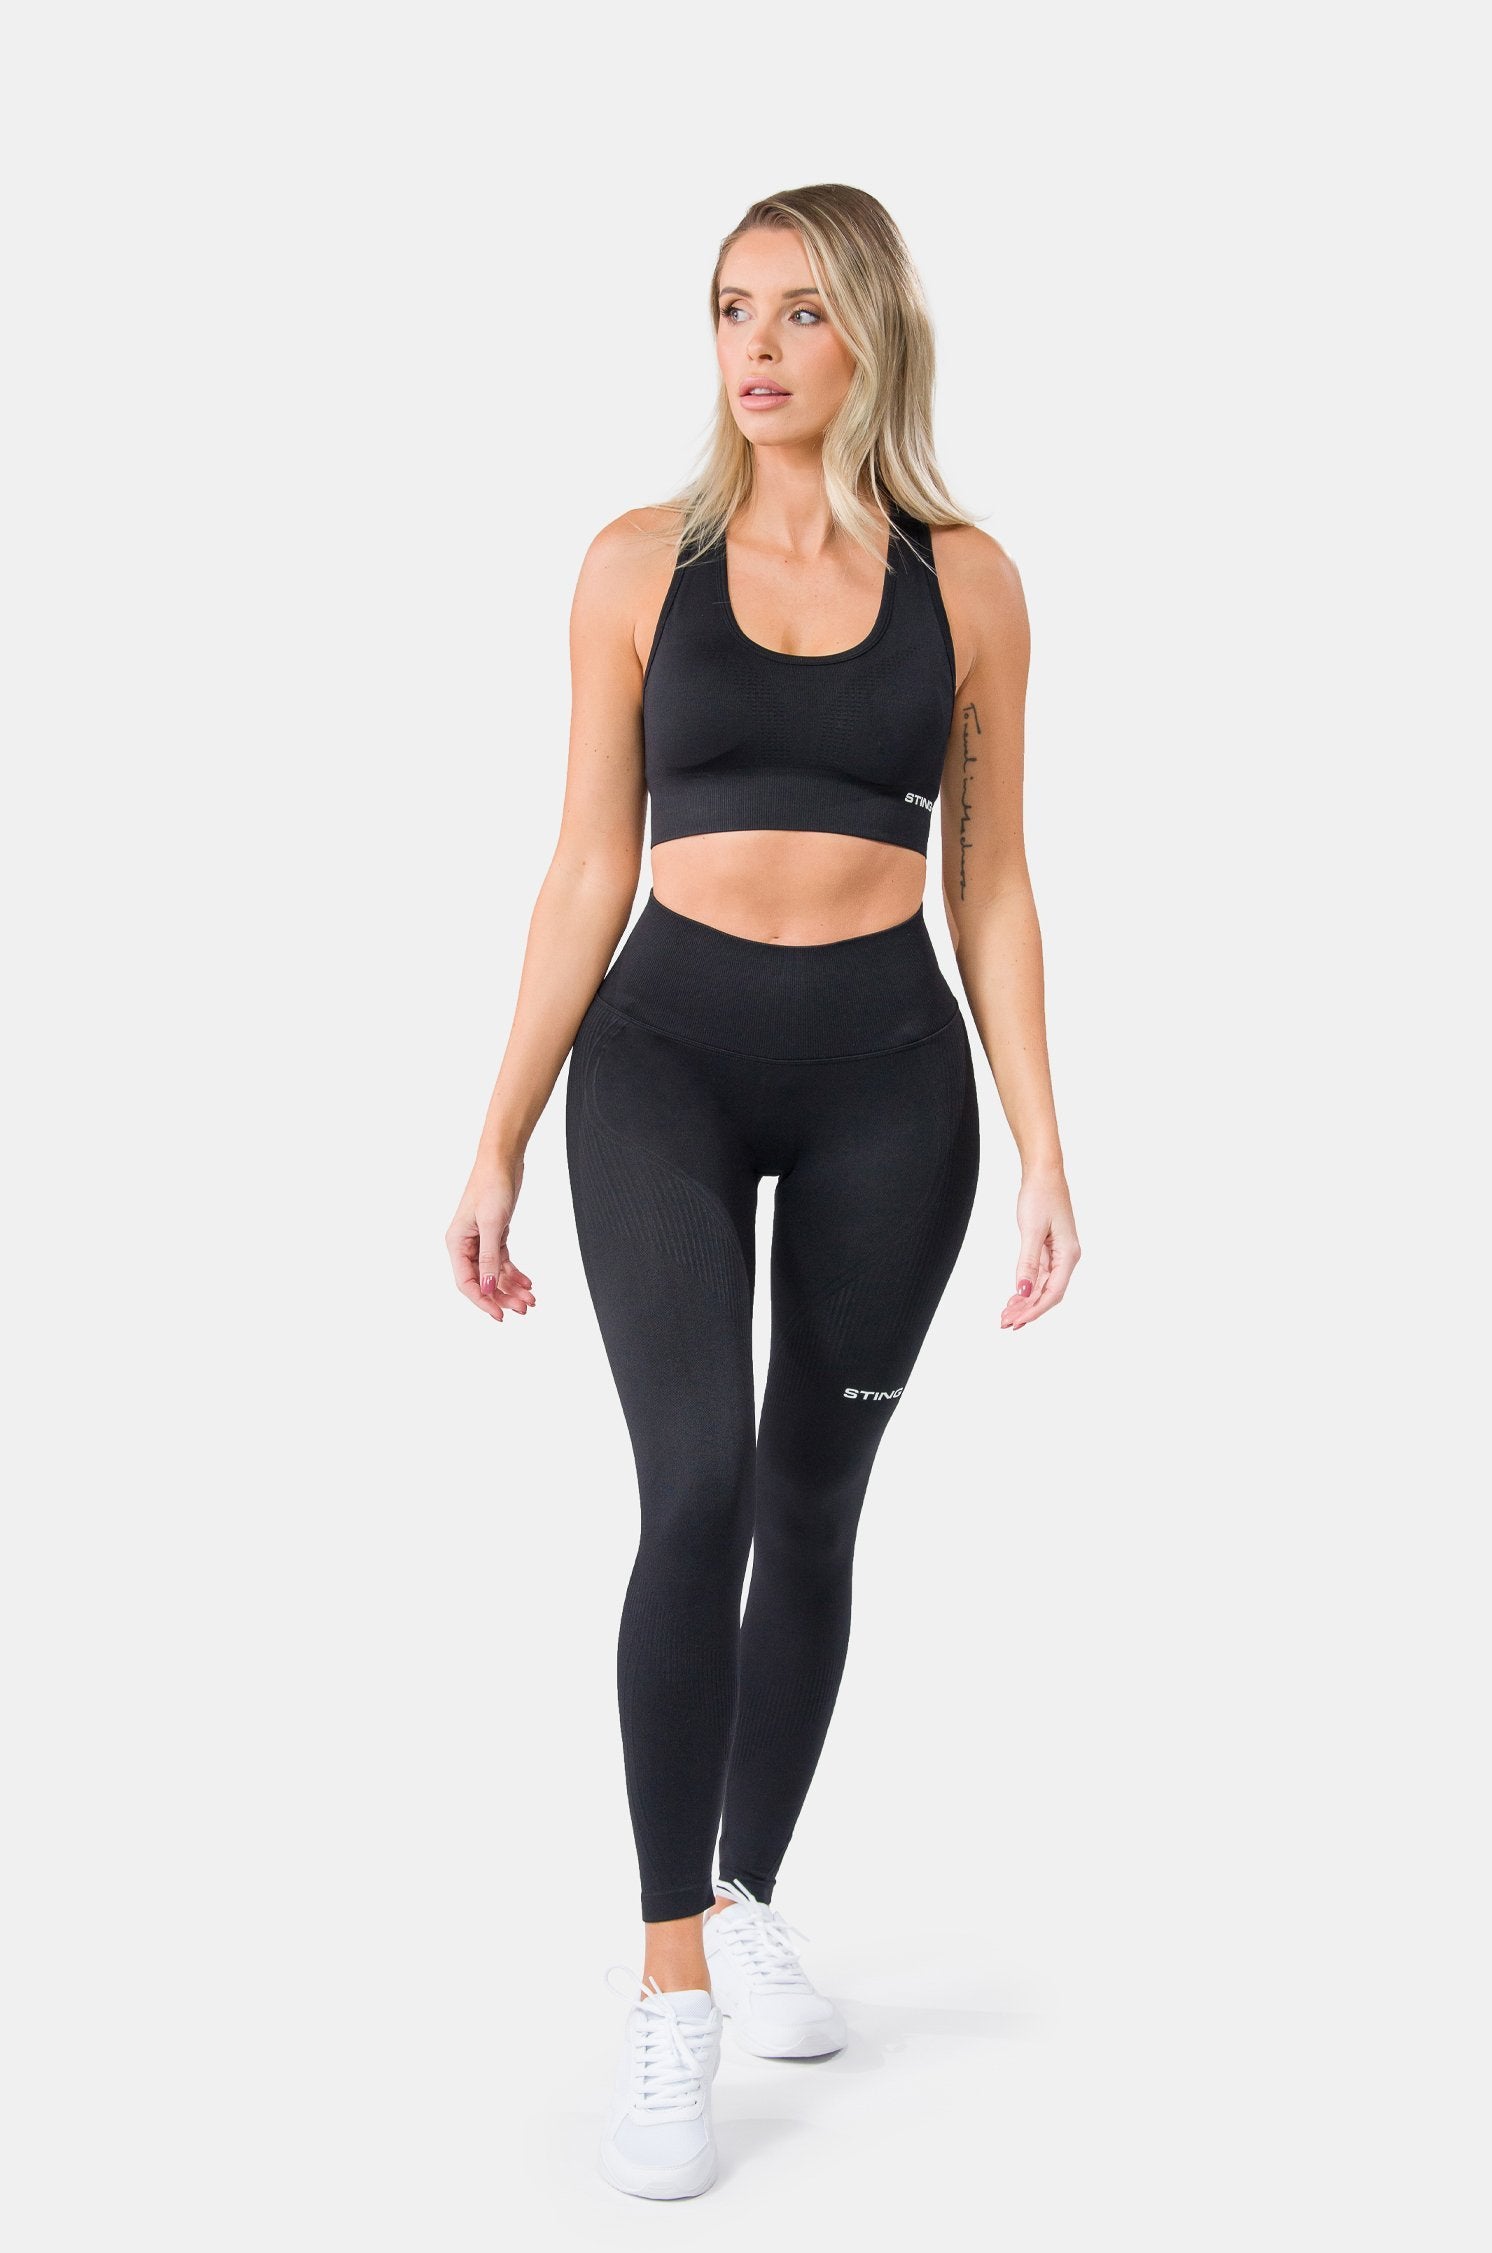 Women's Activewear, Gym Clothes For Women, Whistles ROW